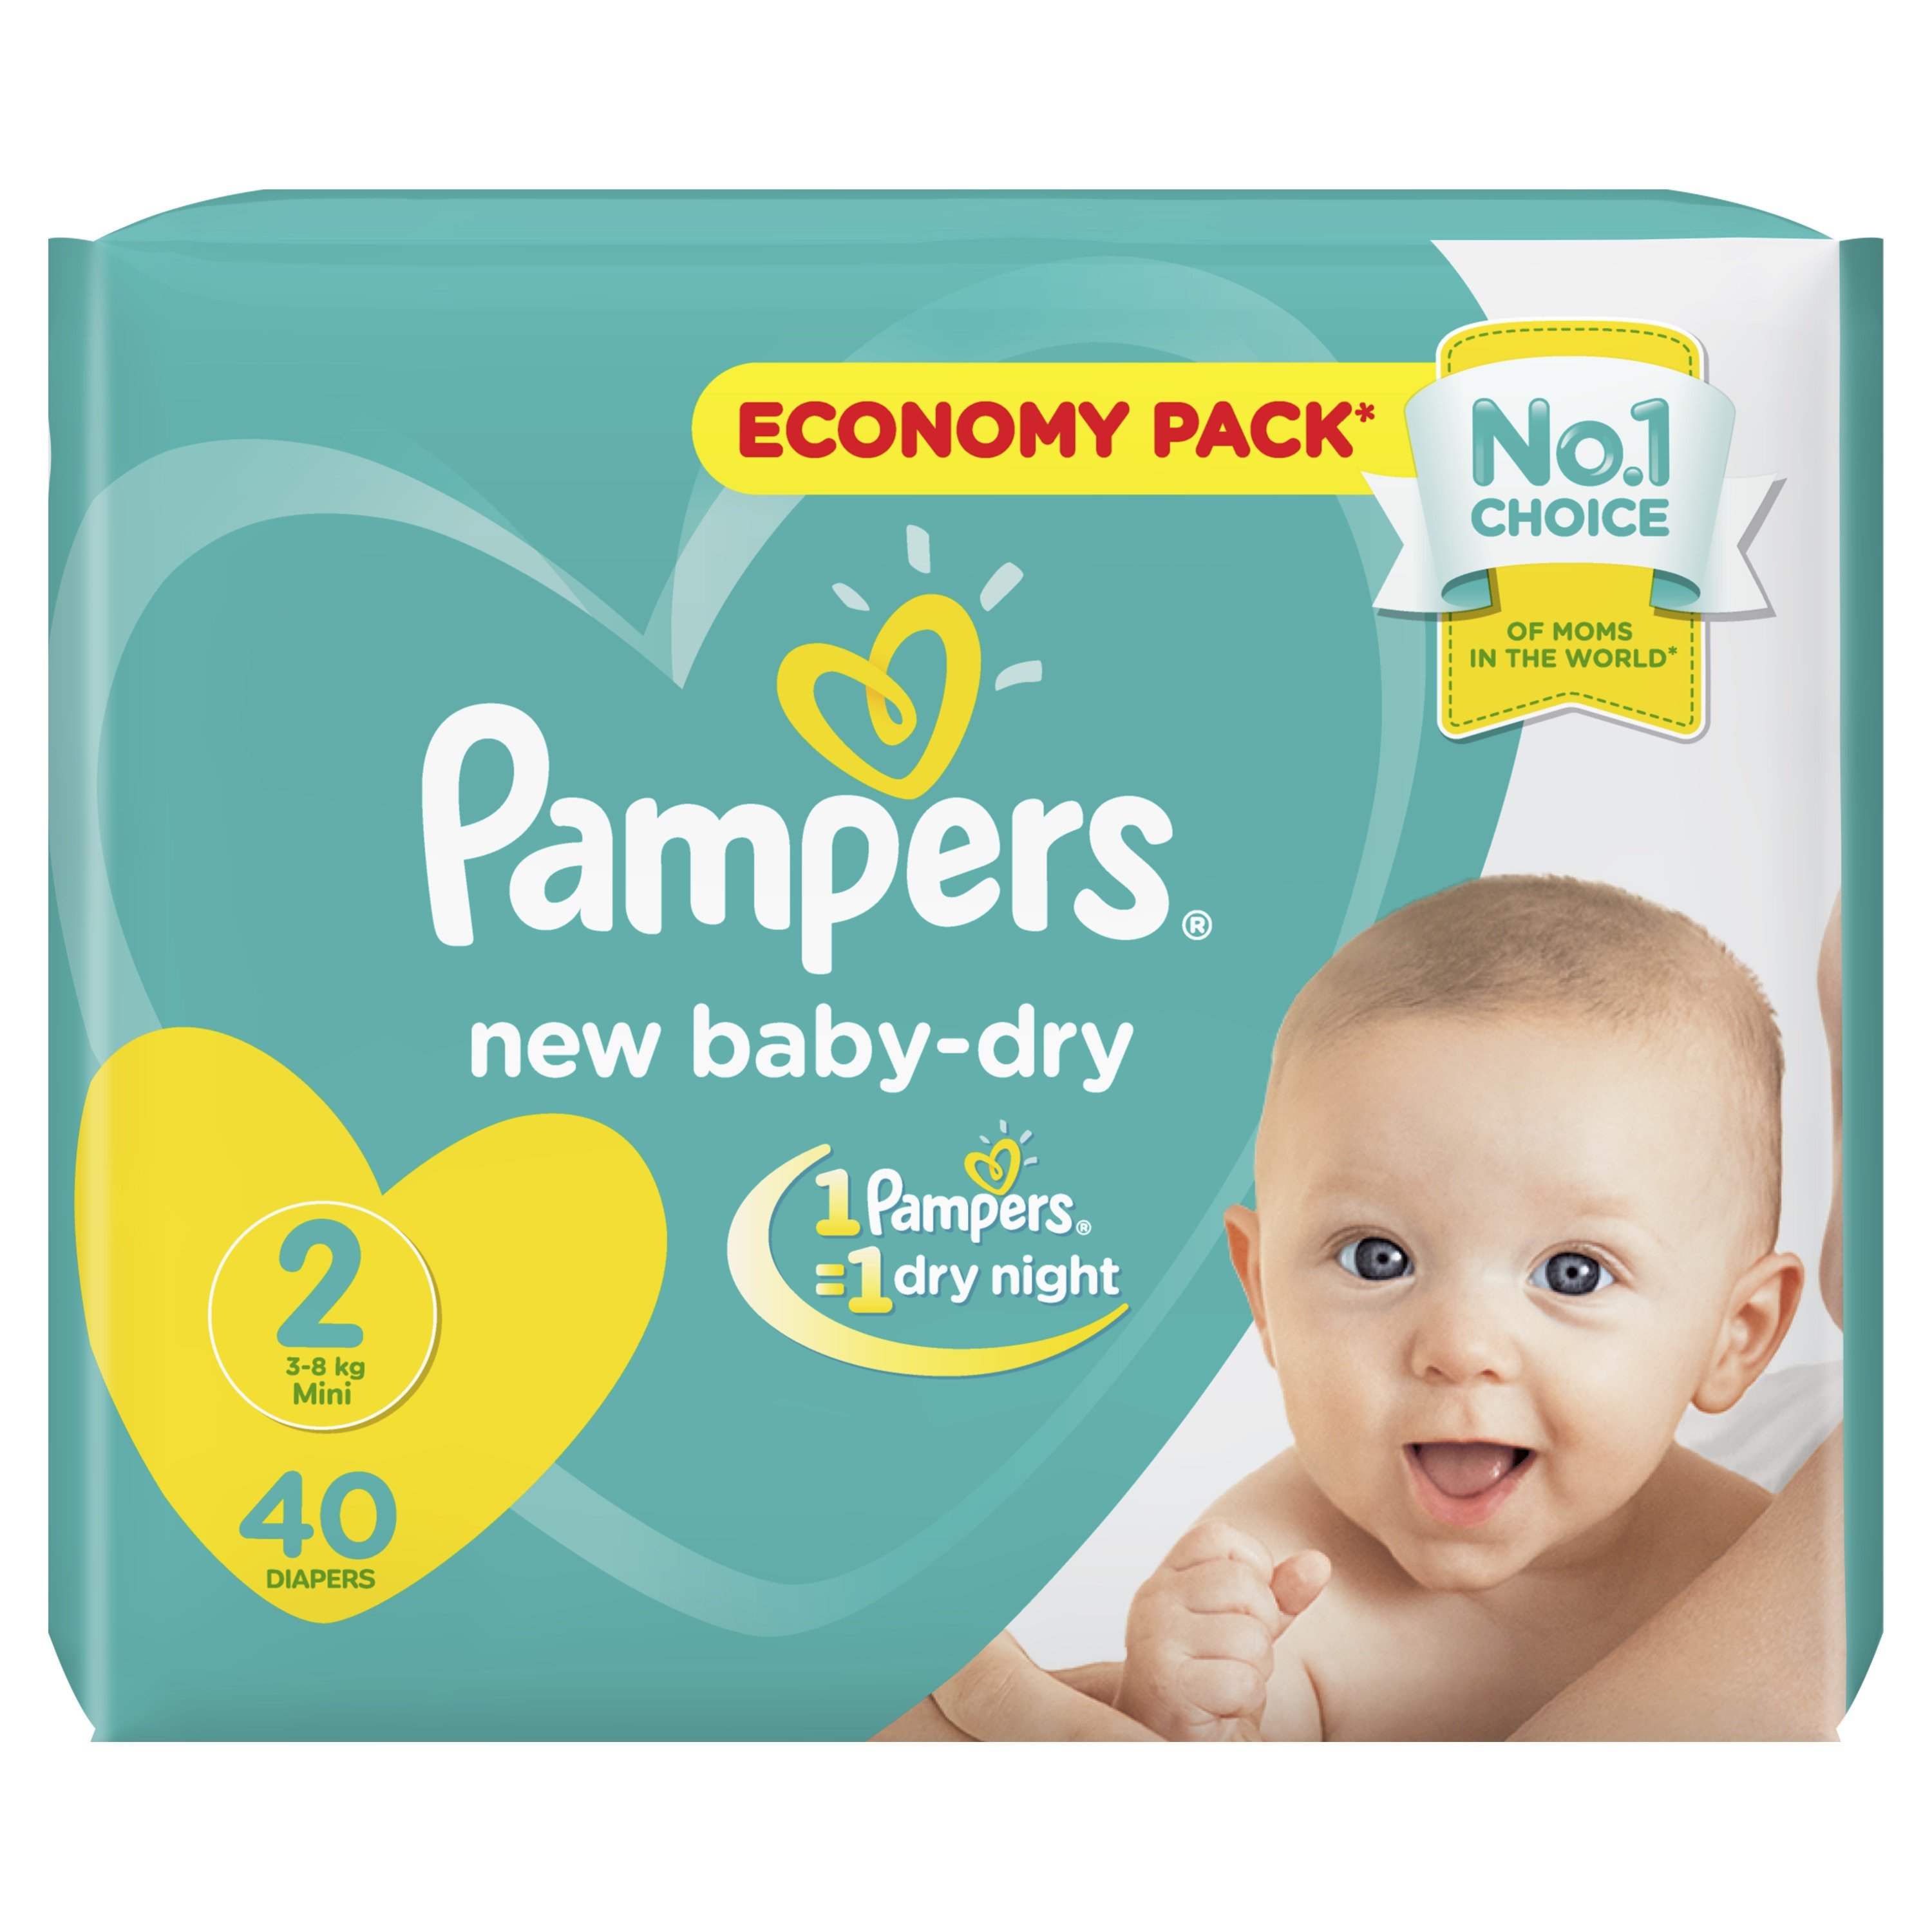 pampers mini size 2